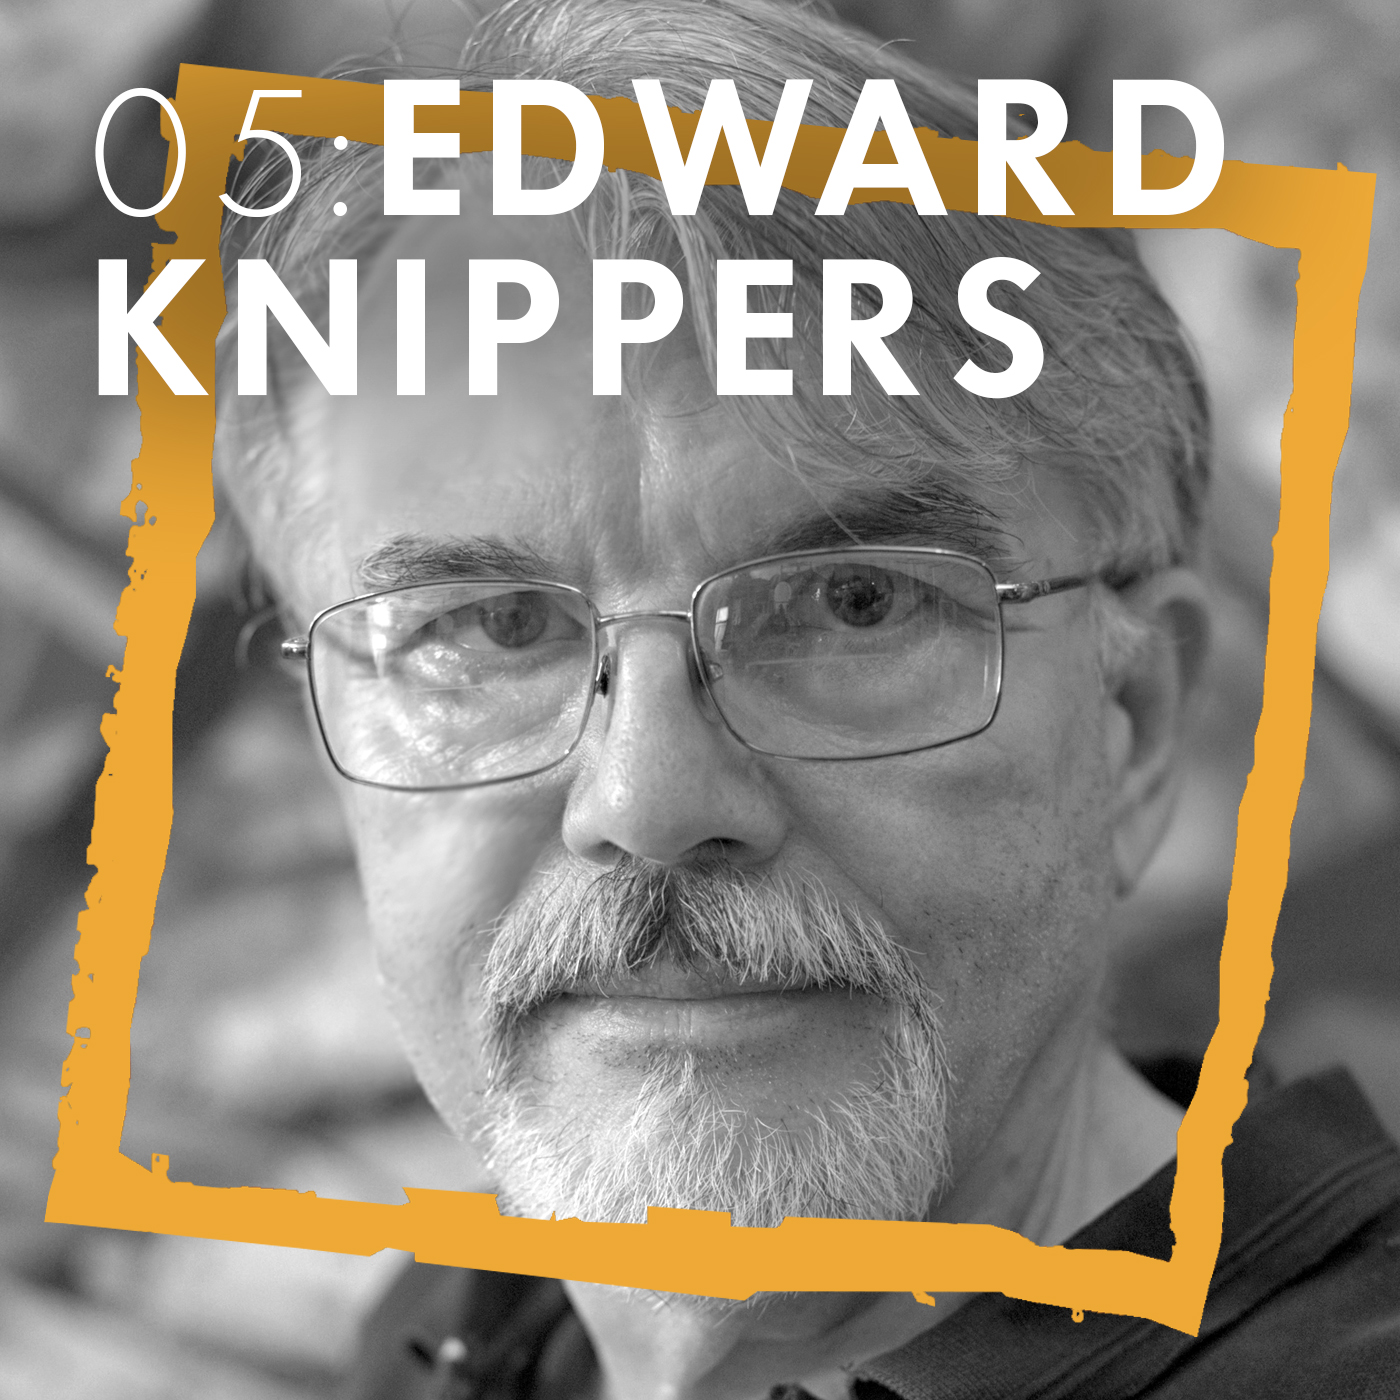 Episode 05: Edward Knippers